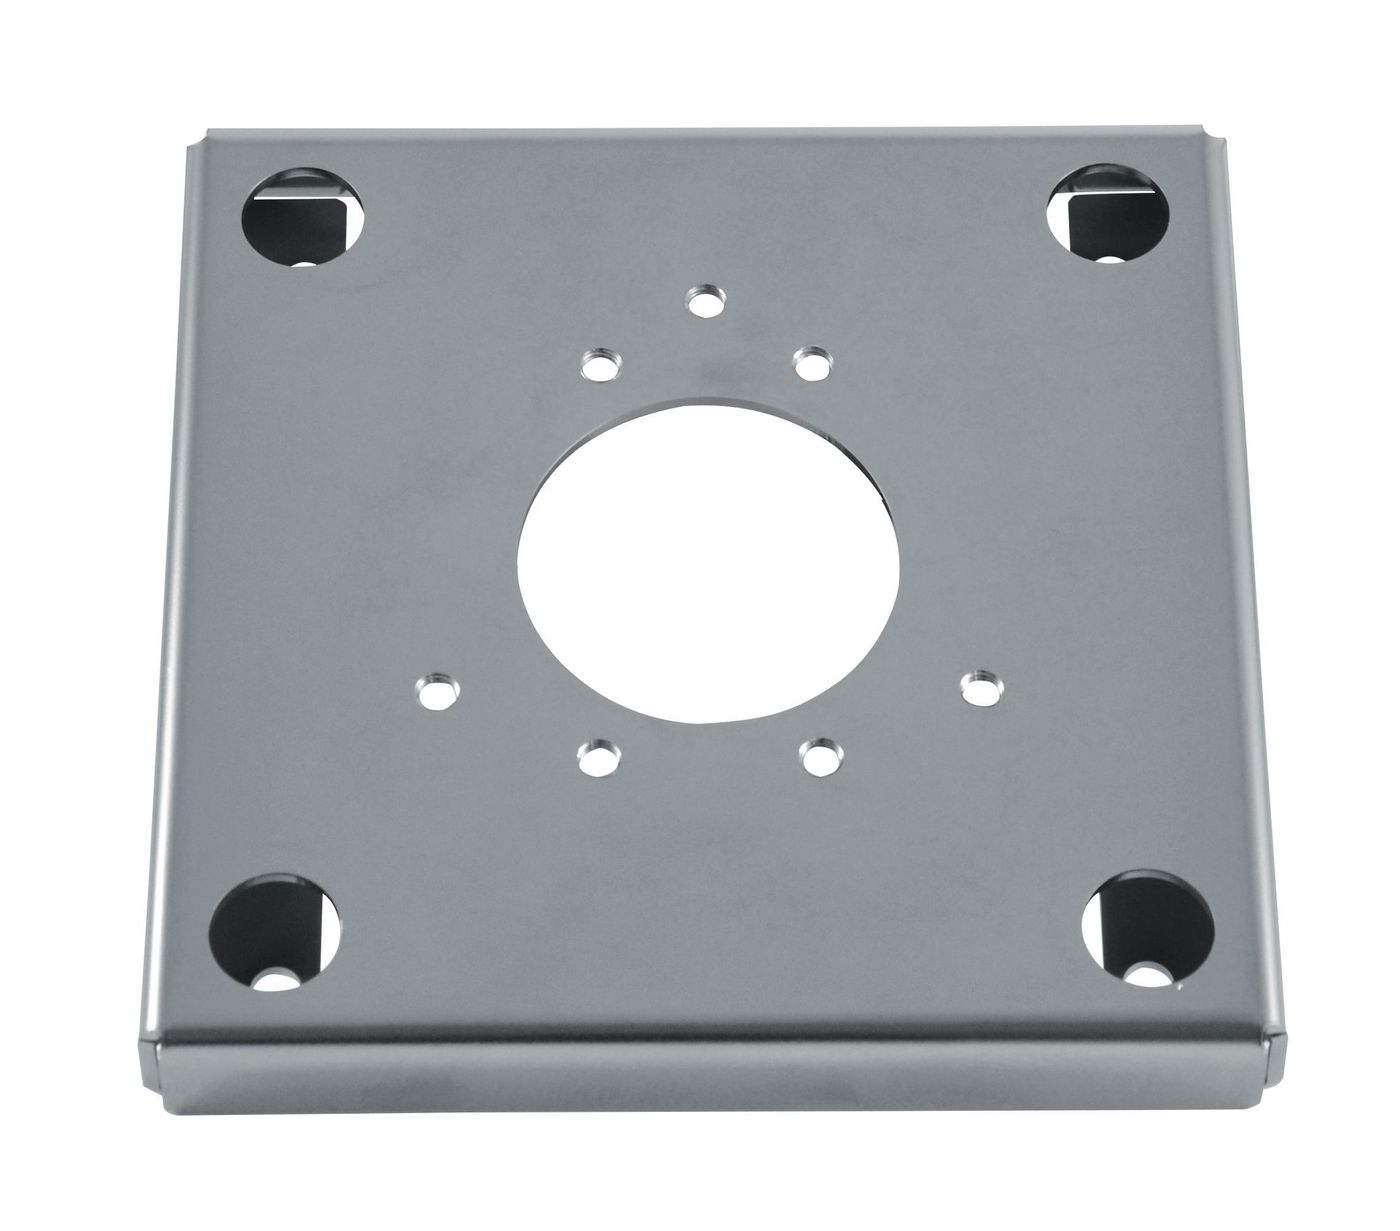 Counter-plate in stainless